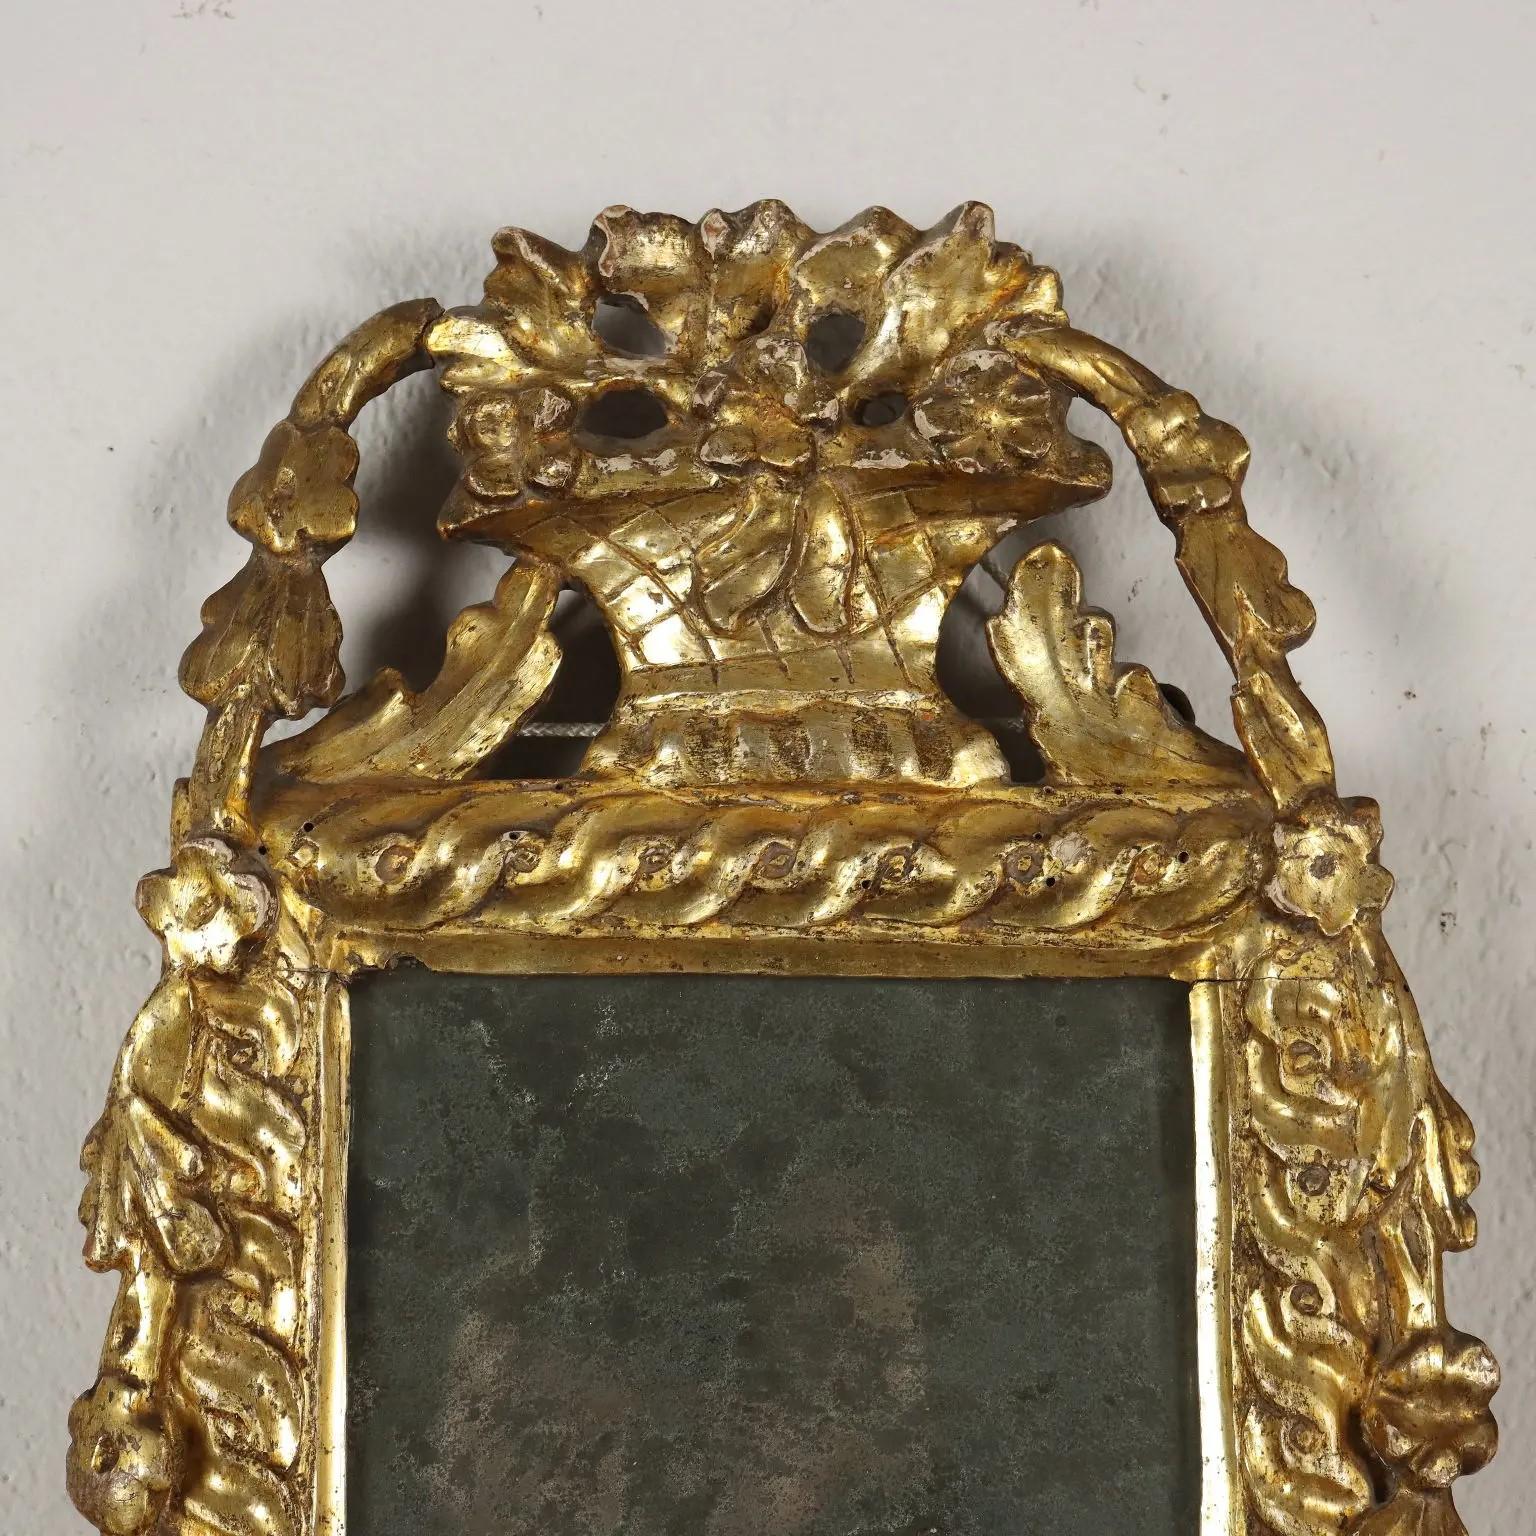 Pair of Italian Neoclassical Giltwood Mirrors - Circa 1780 For Sale 2